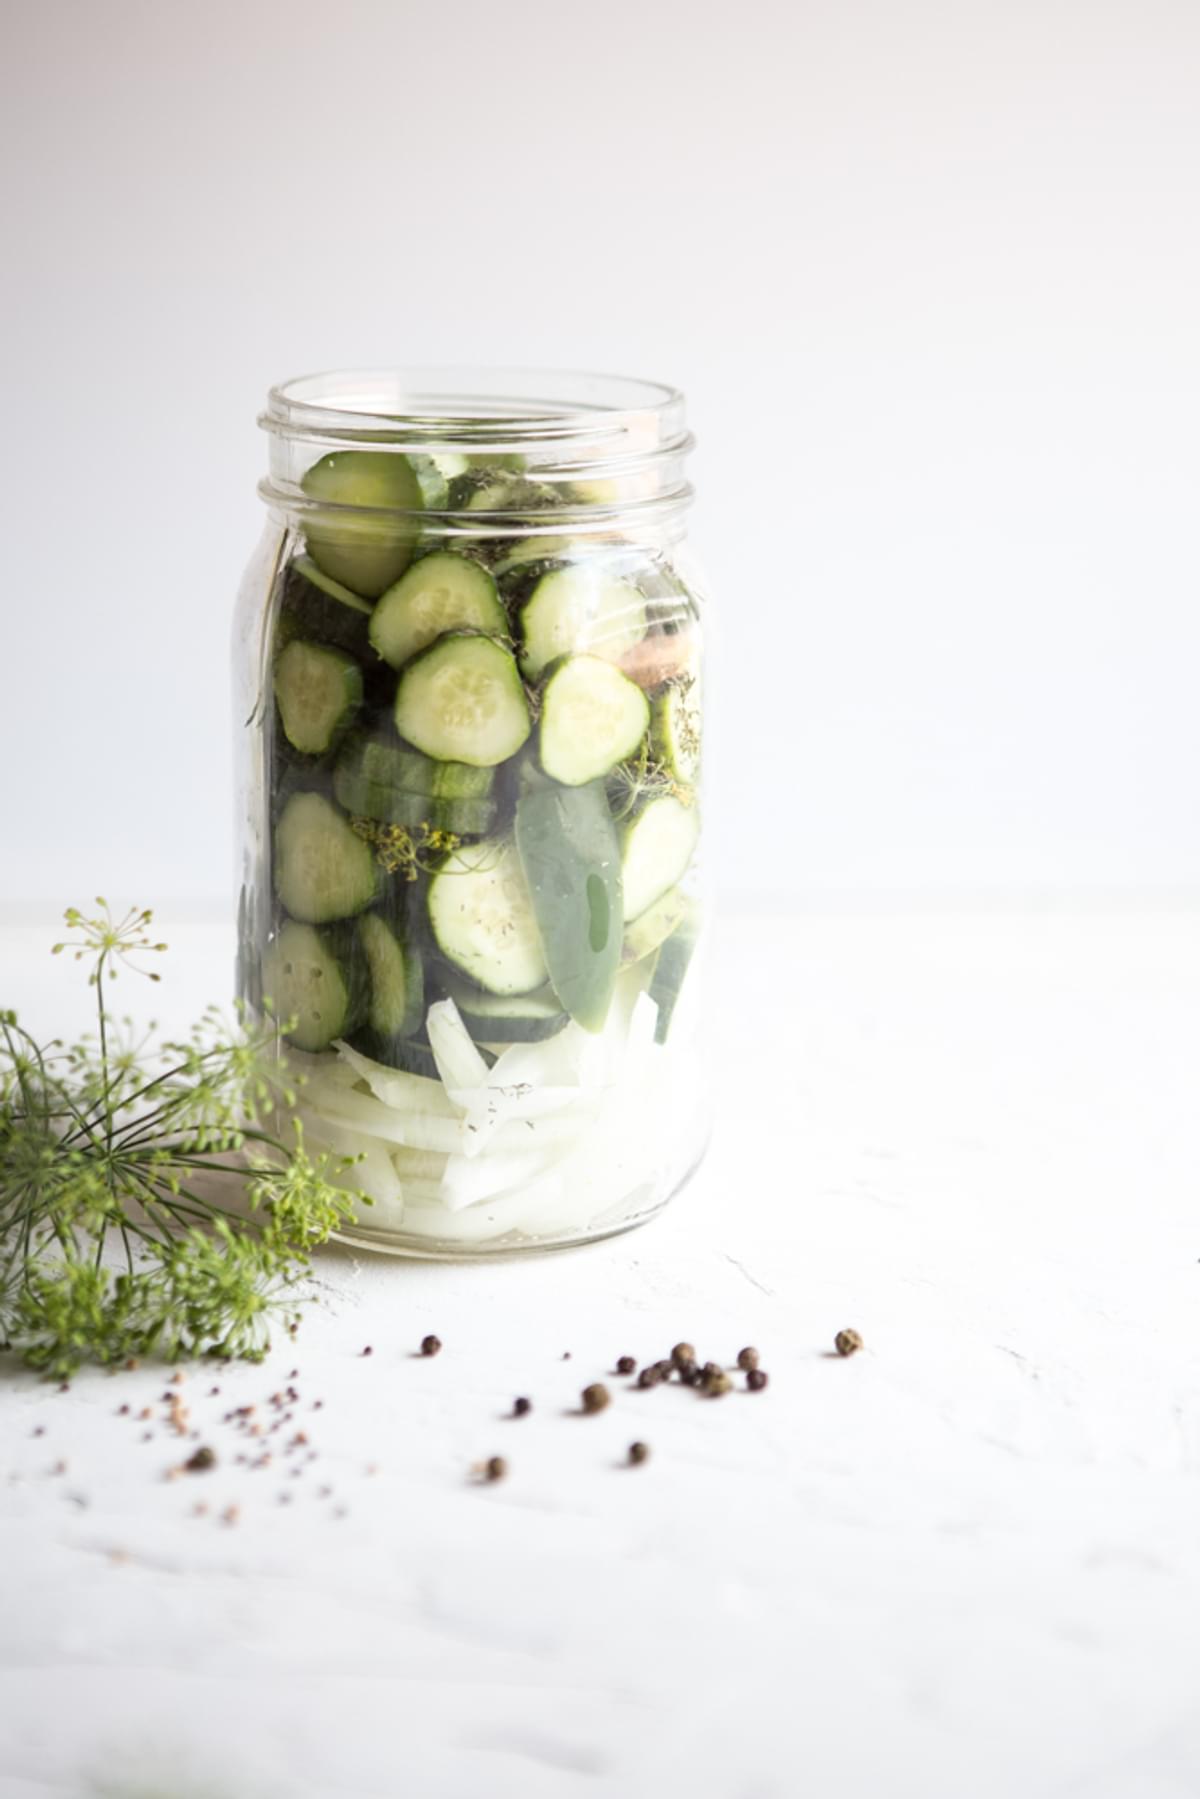 onions, homemade pickles, fresh dill and jalapeno packed into a glass pickle jar